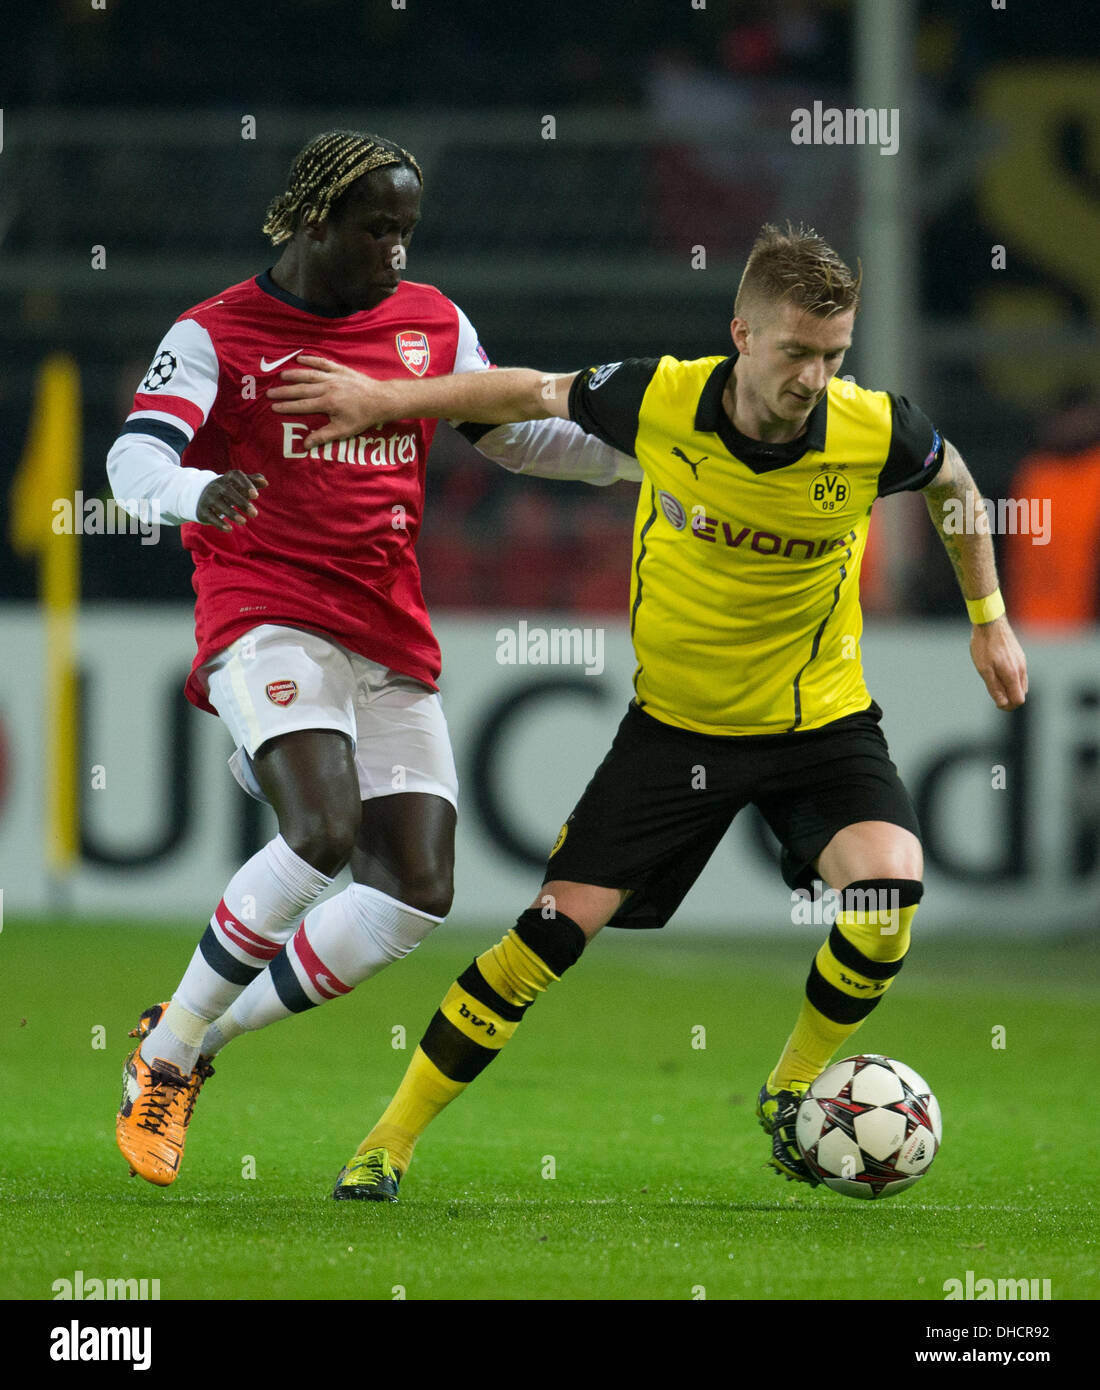 Dortmund, Germany. 06th Nov, 2013. Dortmund's Marco Reus (R) in action against Arsenal's Bacary Sagna during the Champions League Group F match between Borussia Dortmund and FC Arsenal London at BVB-Stadion in Dortmund, Germany, 06 November 2013. Photo: Bernd Thissen/dpa/Alamy Live News Stock Photo